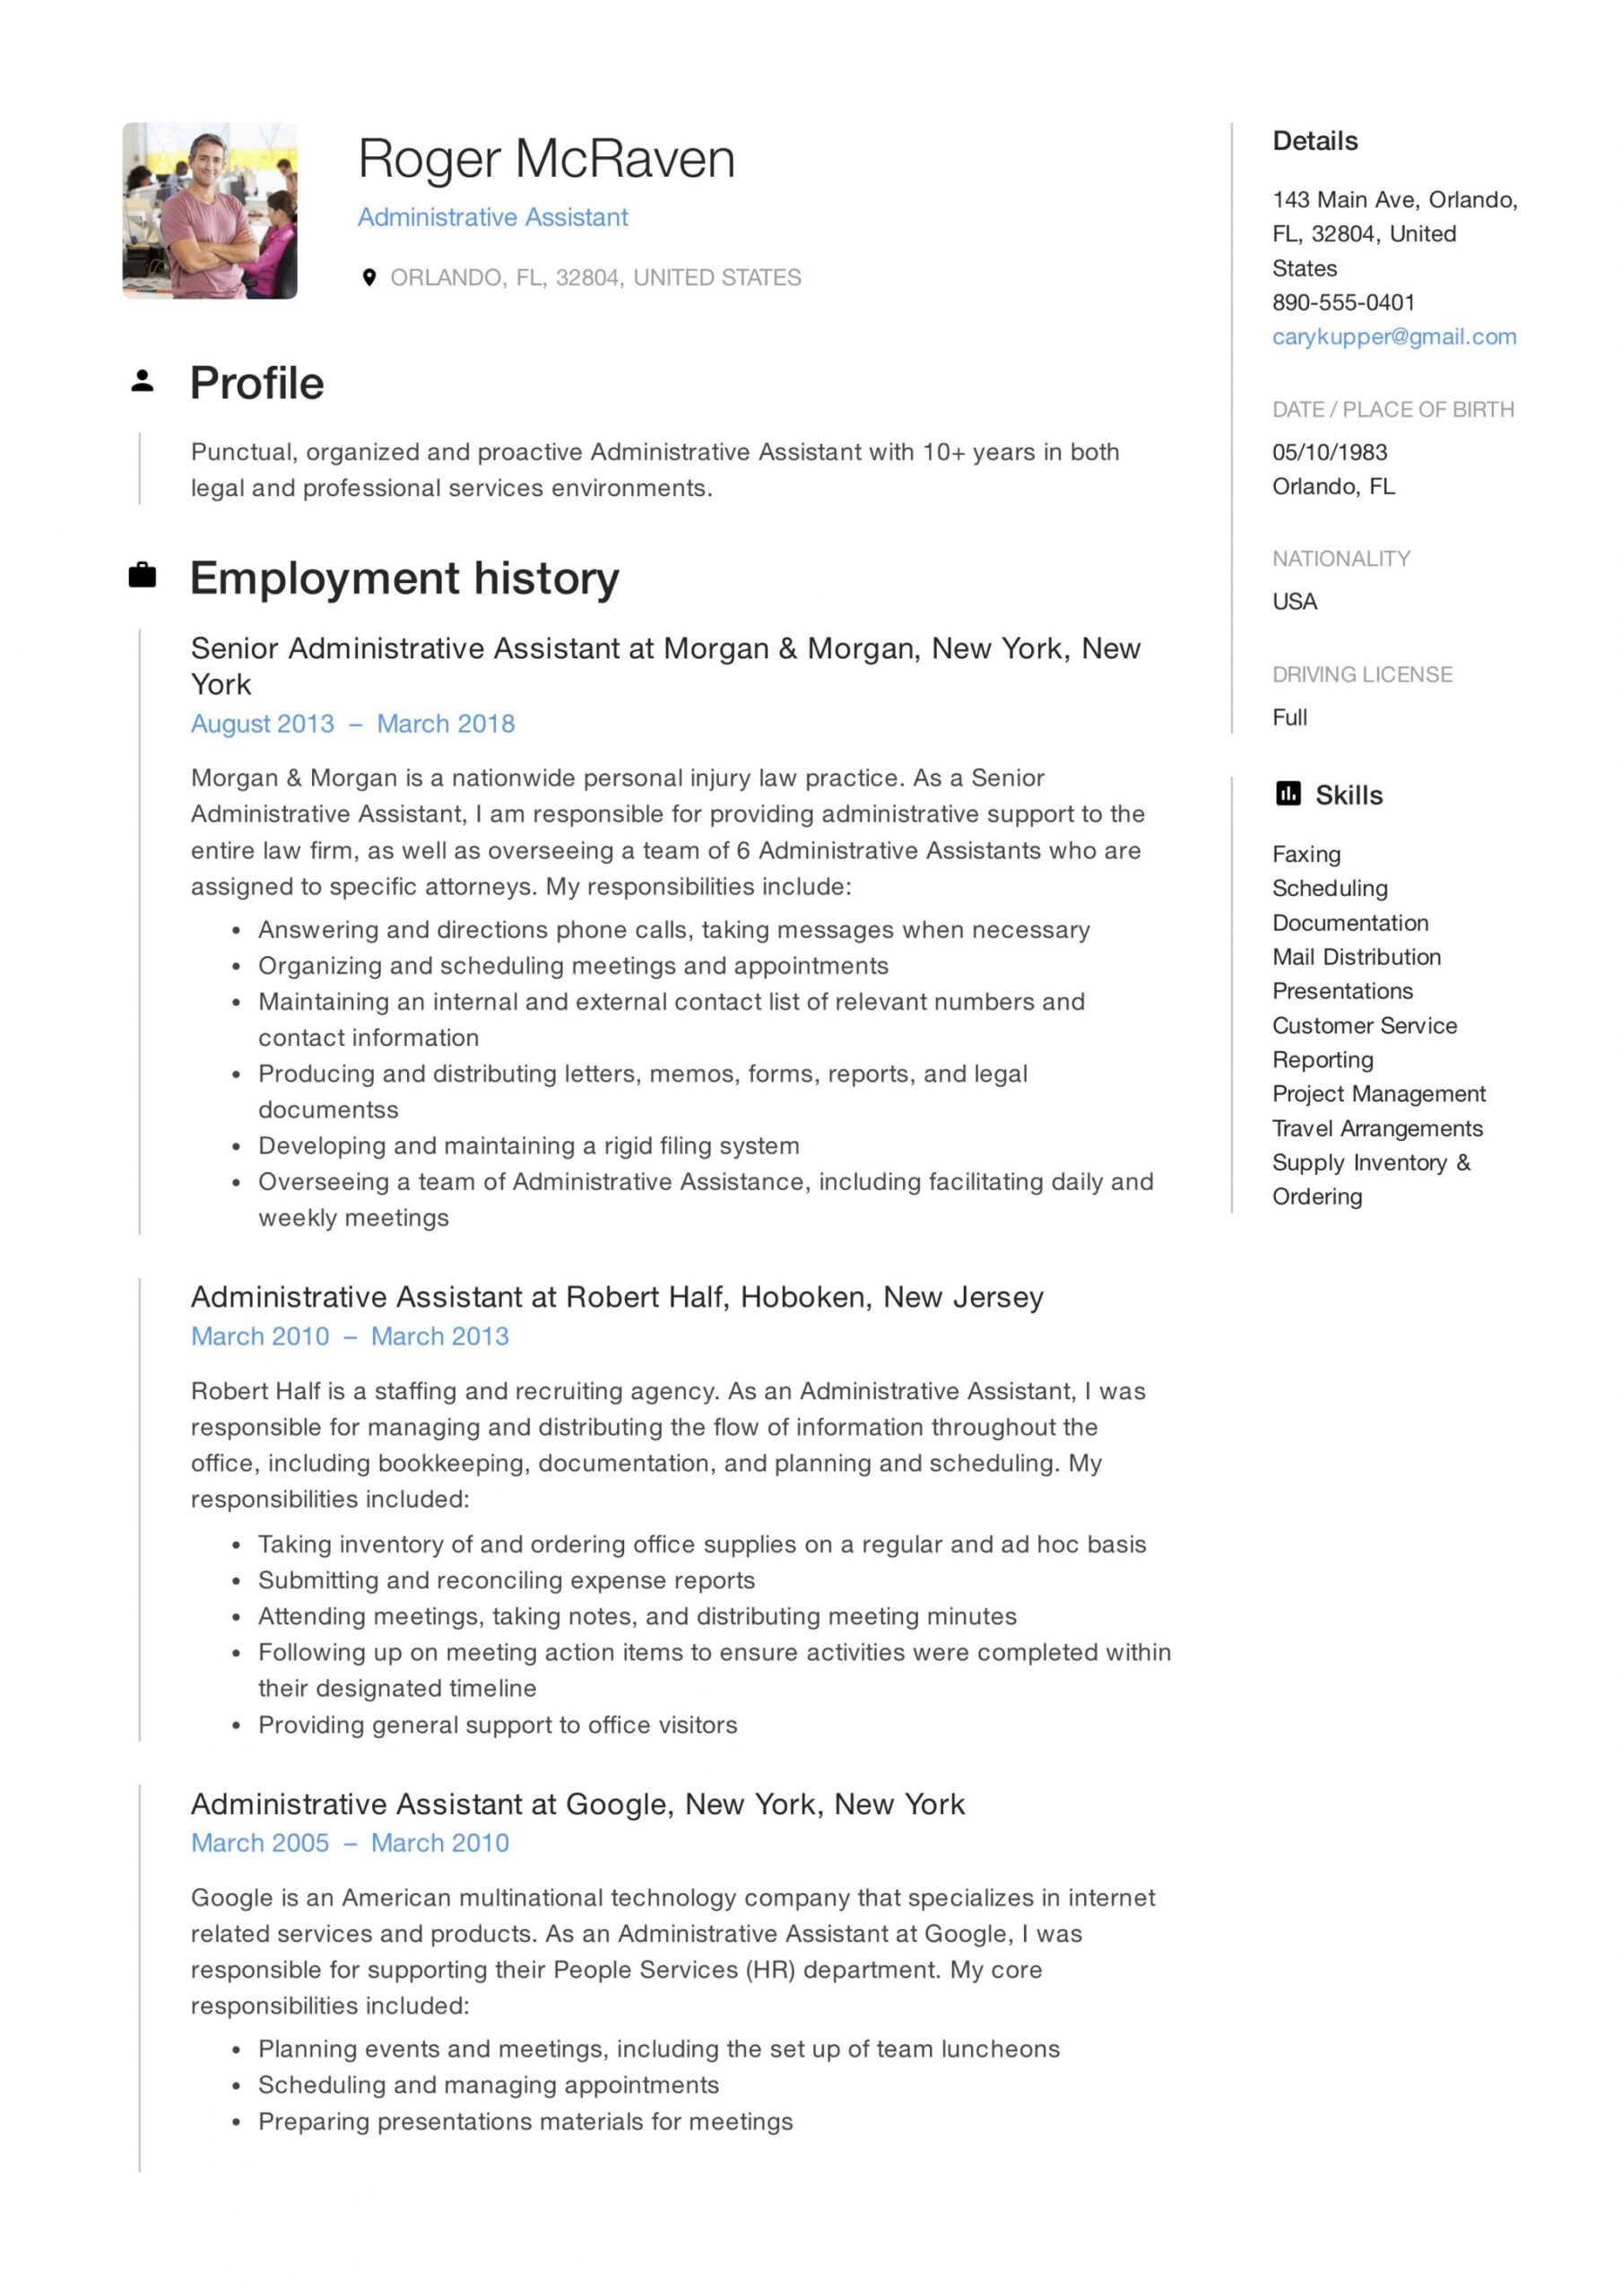 Sample Summary for Administrative assistant Resume 19 Free Administrative assistant Resumes & Writing Guide